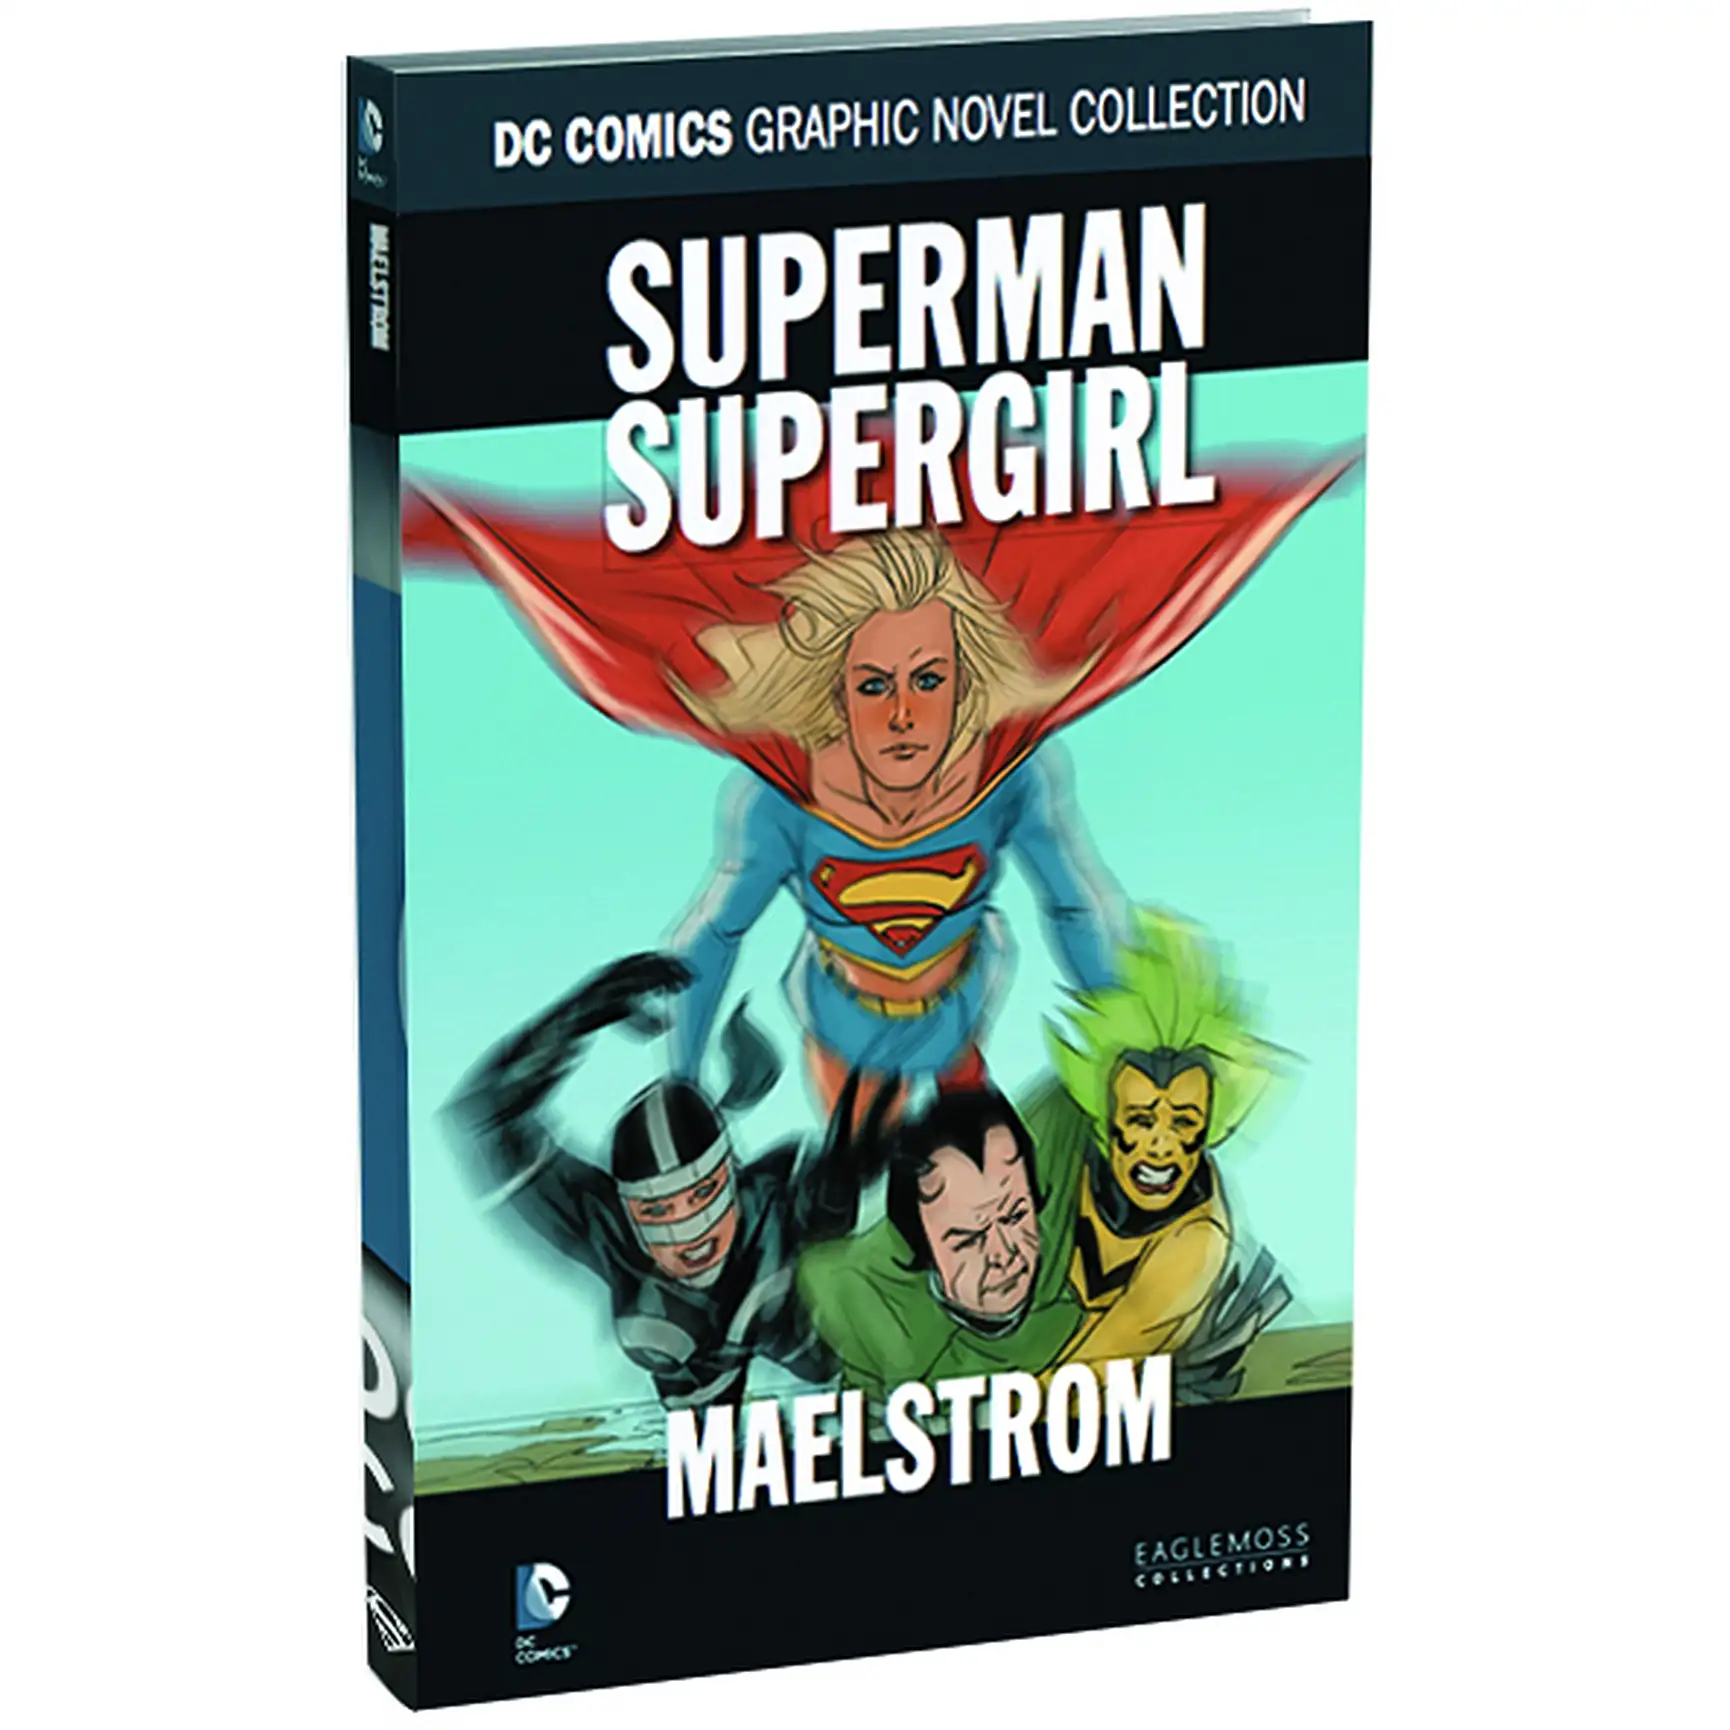 DC Comics Graphic Novel Collection Superman Supergirl - Maelstrom